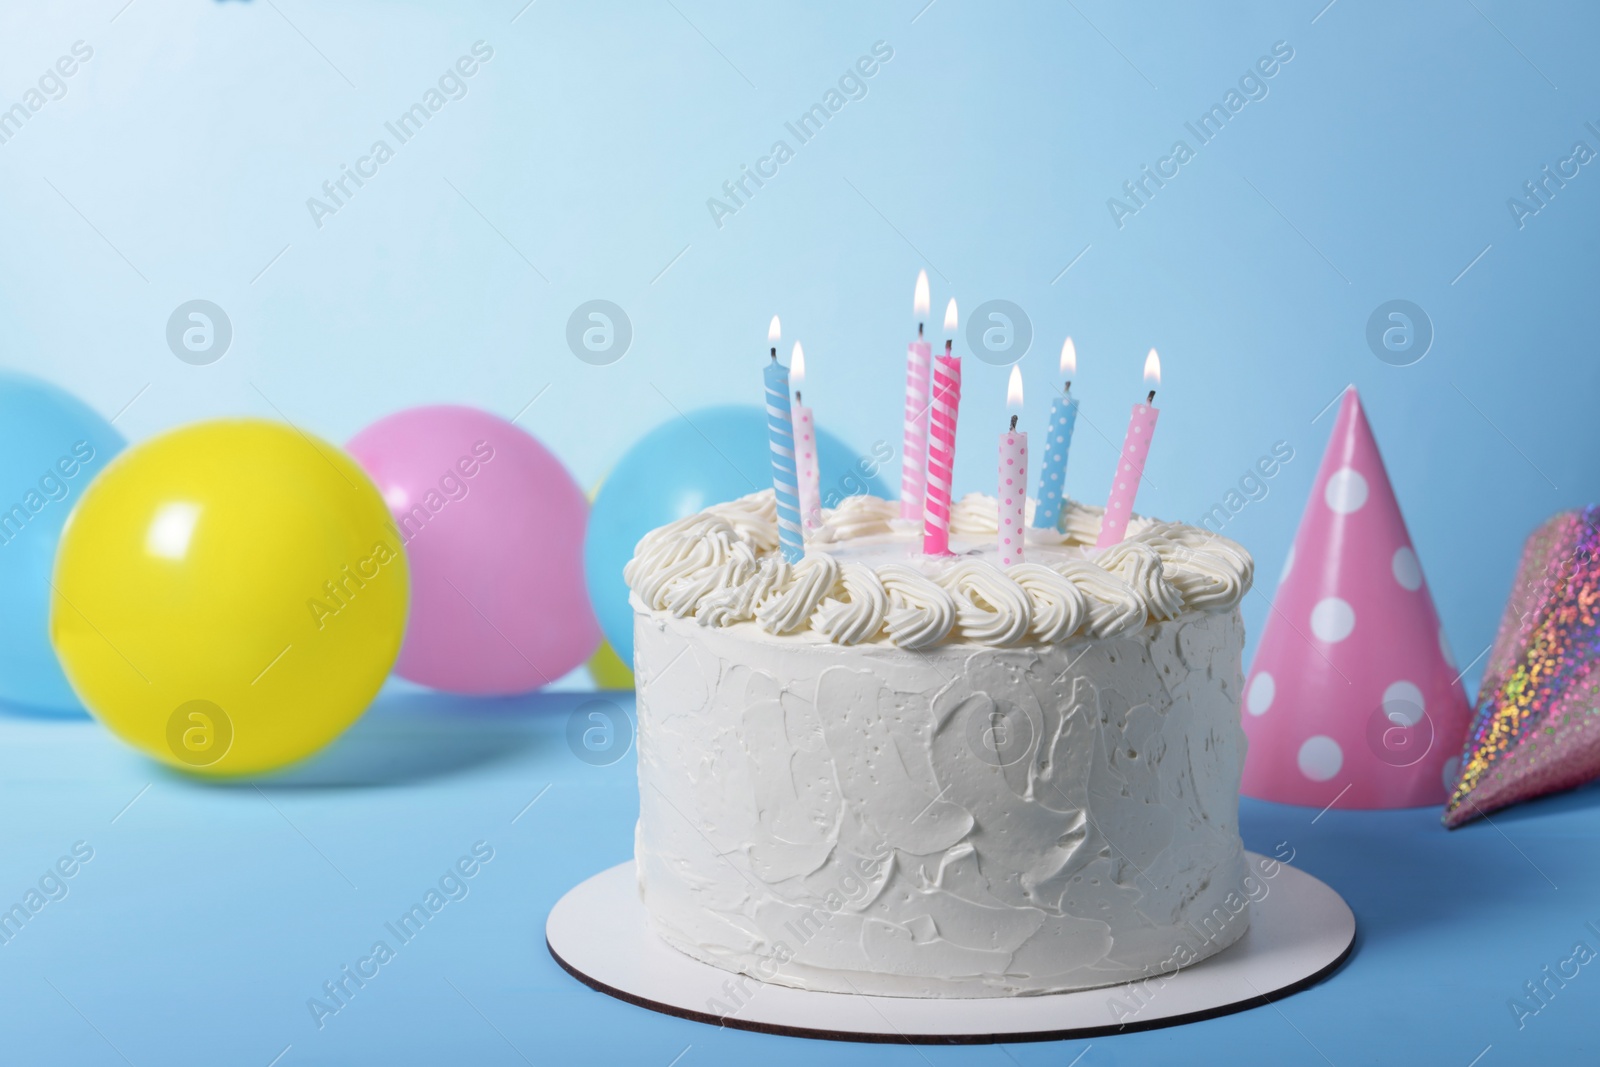 Photo of Delicious cake with burning candles and festive decor on light blue background. Space for text